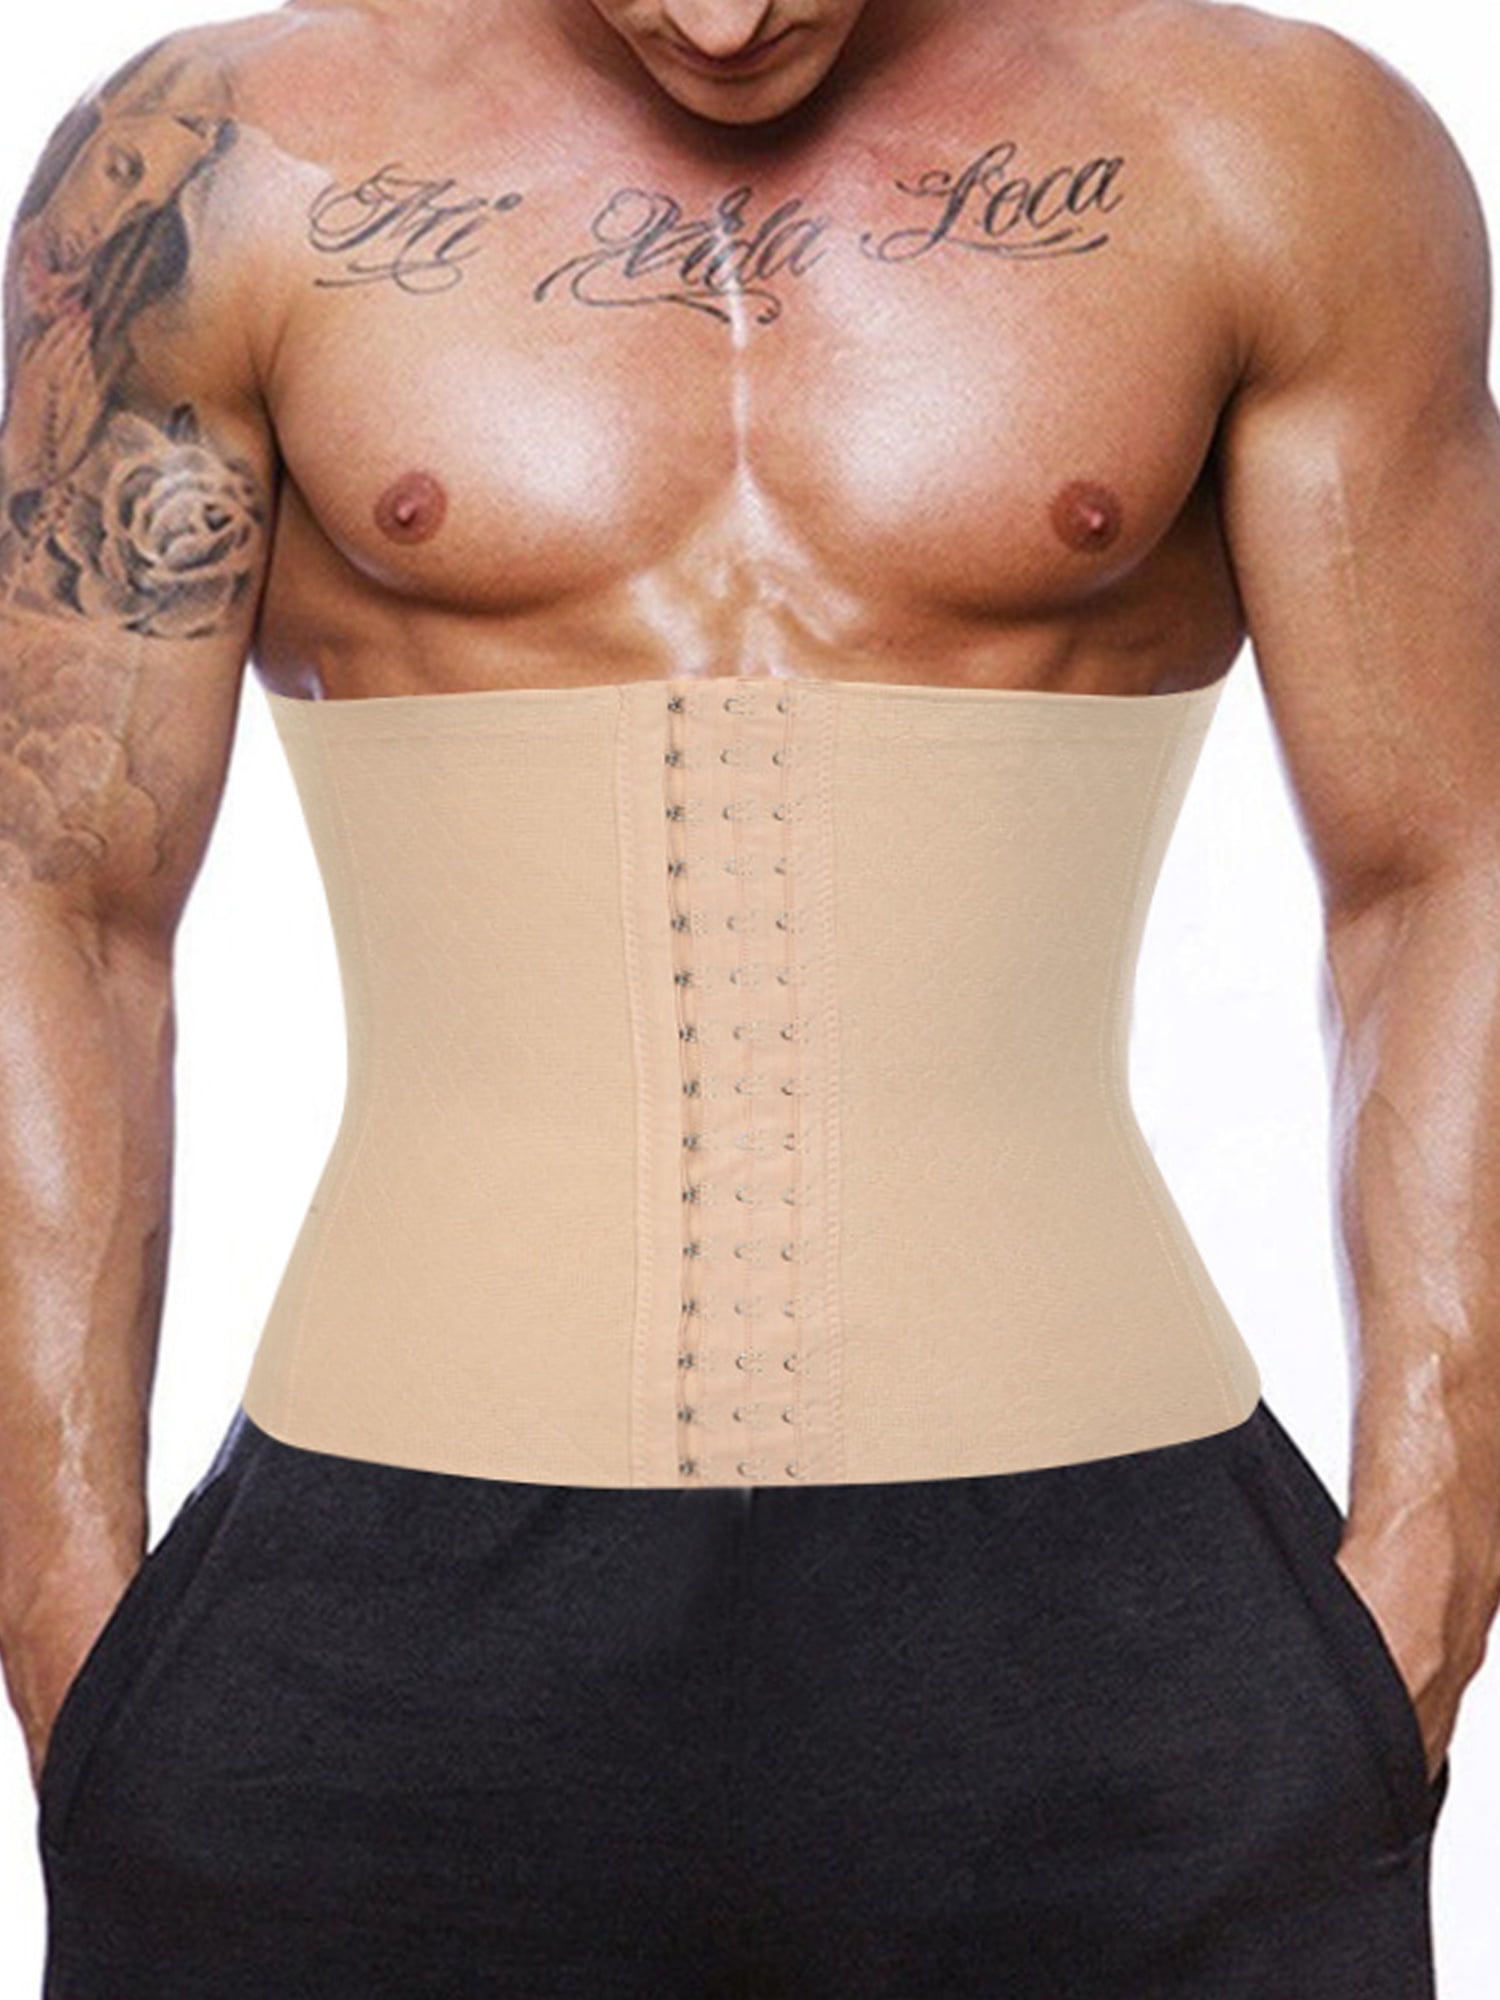 Panegy Mens Waist Trimmer Body Slimming Shaper Gym Fitness Trainer Belly Back Support Belt Workout for Weight Loss